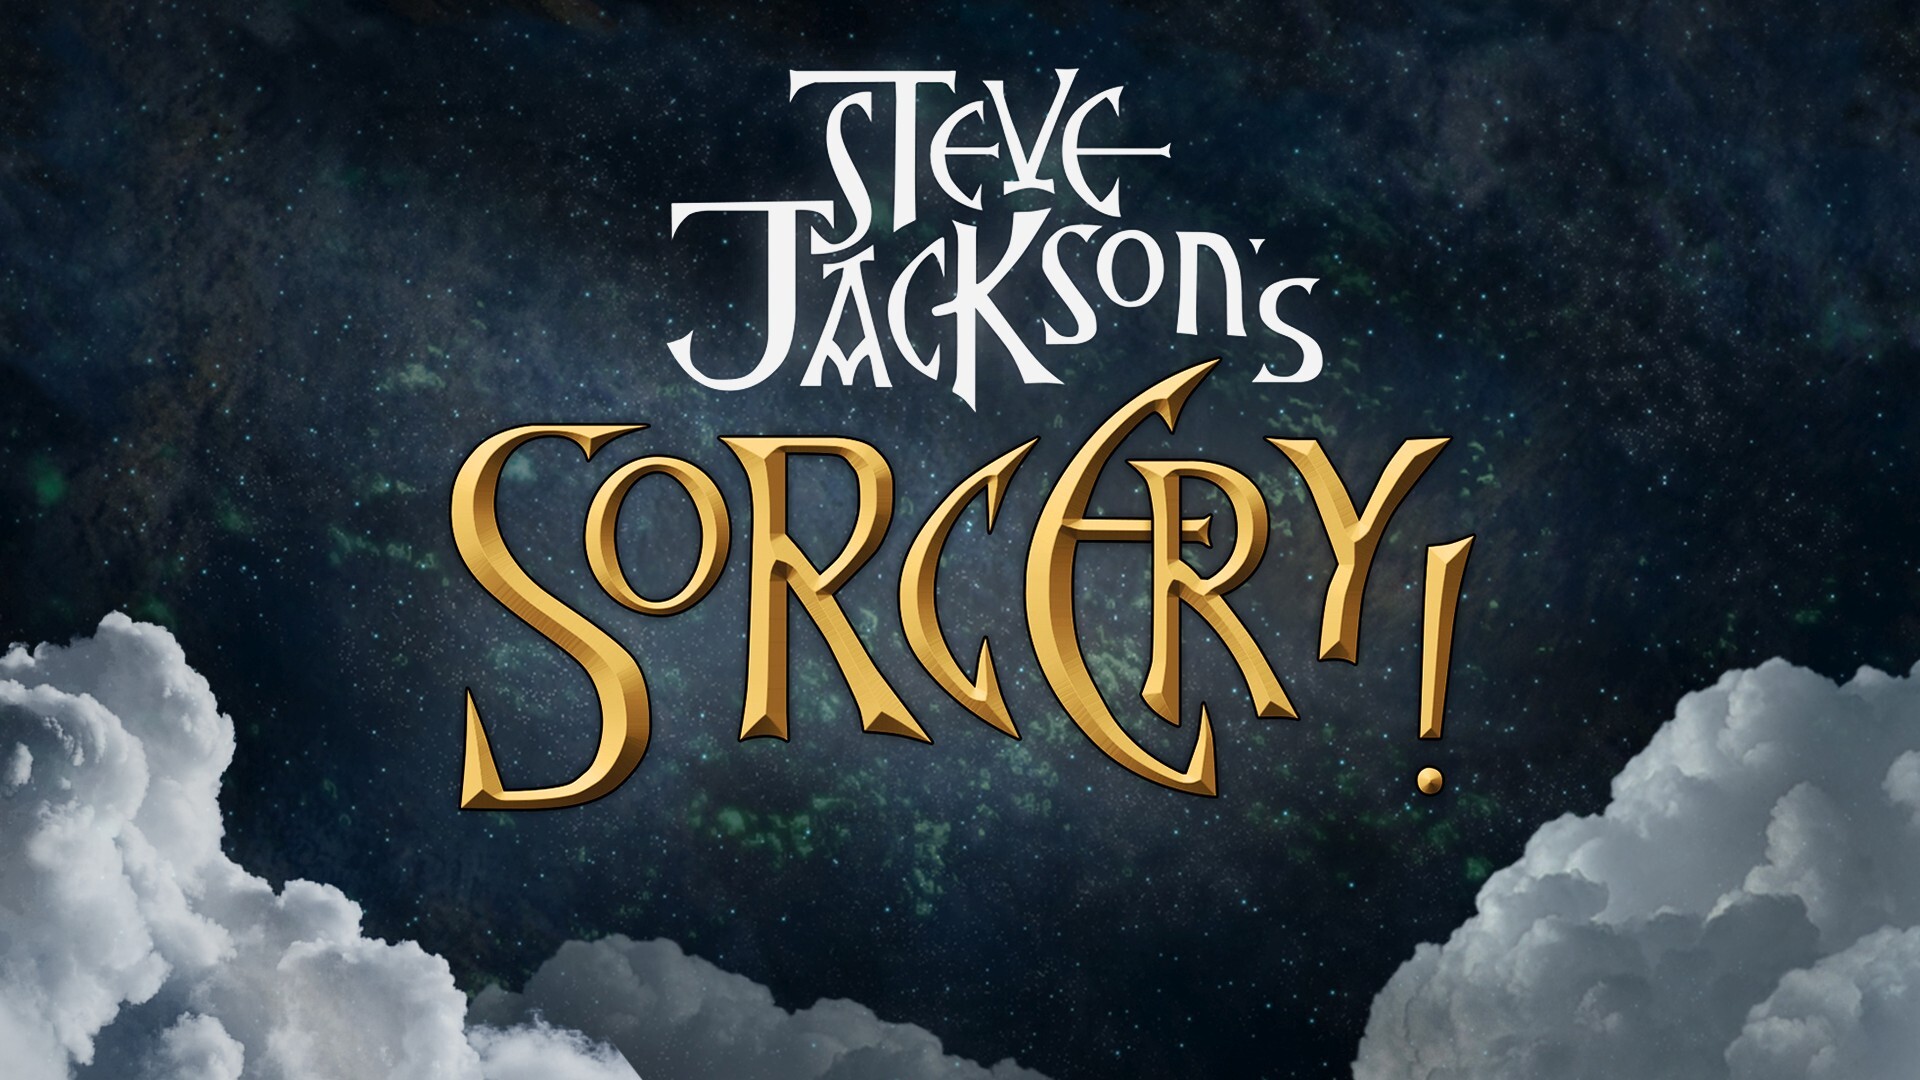 Steve Jackson's Sorcery!: The Complete Collection